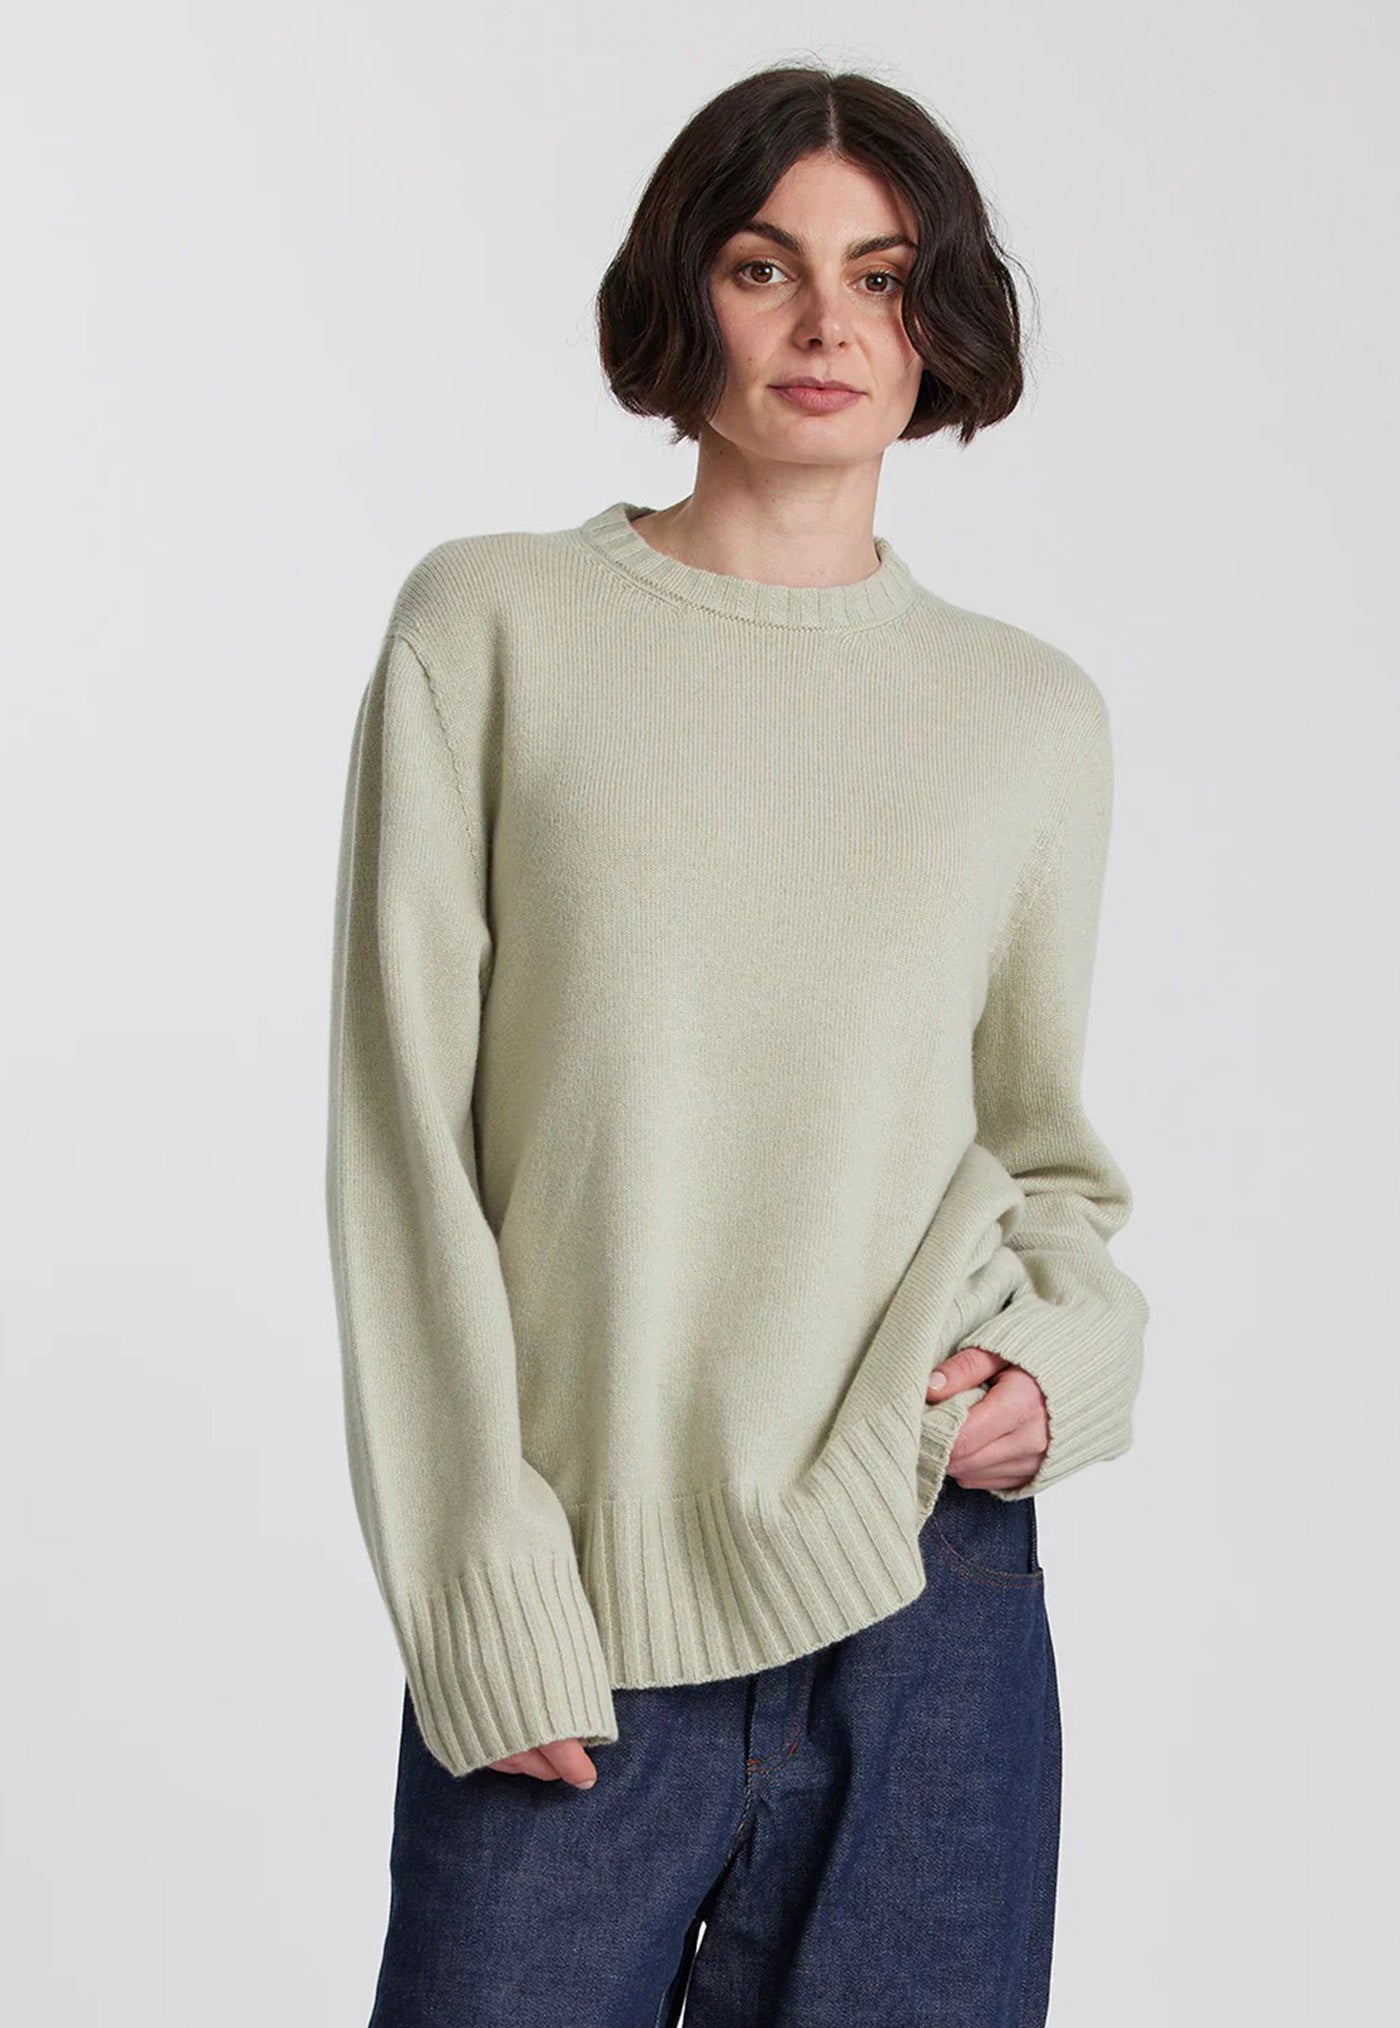 Cashmere Oversized Sweater - Honeydew sold by Angel Divine